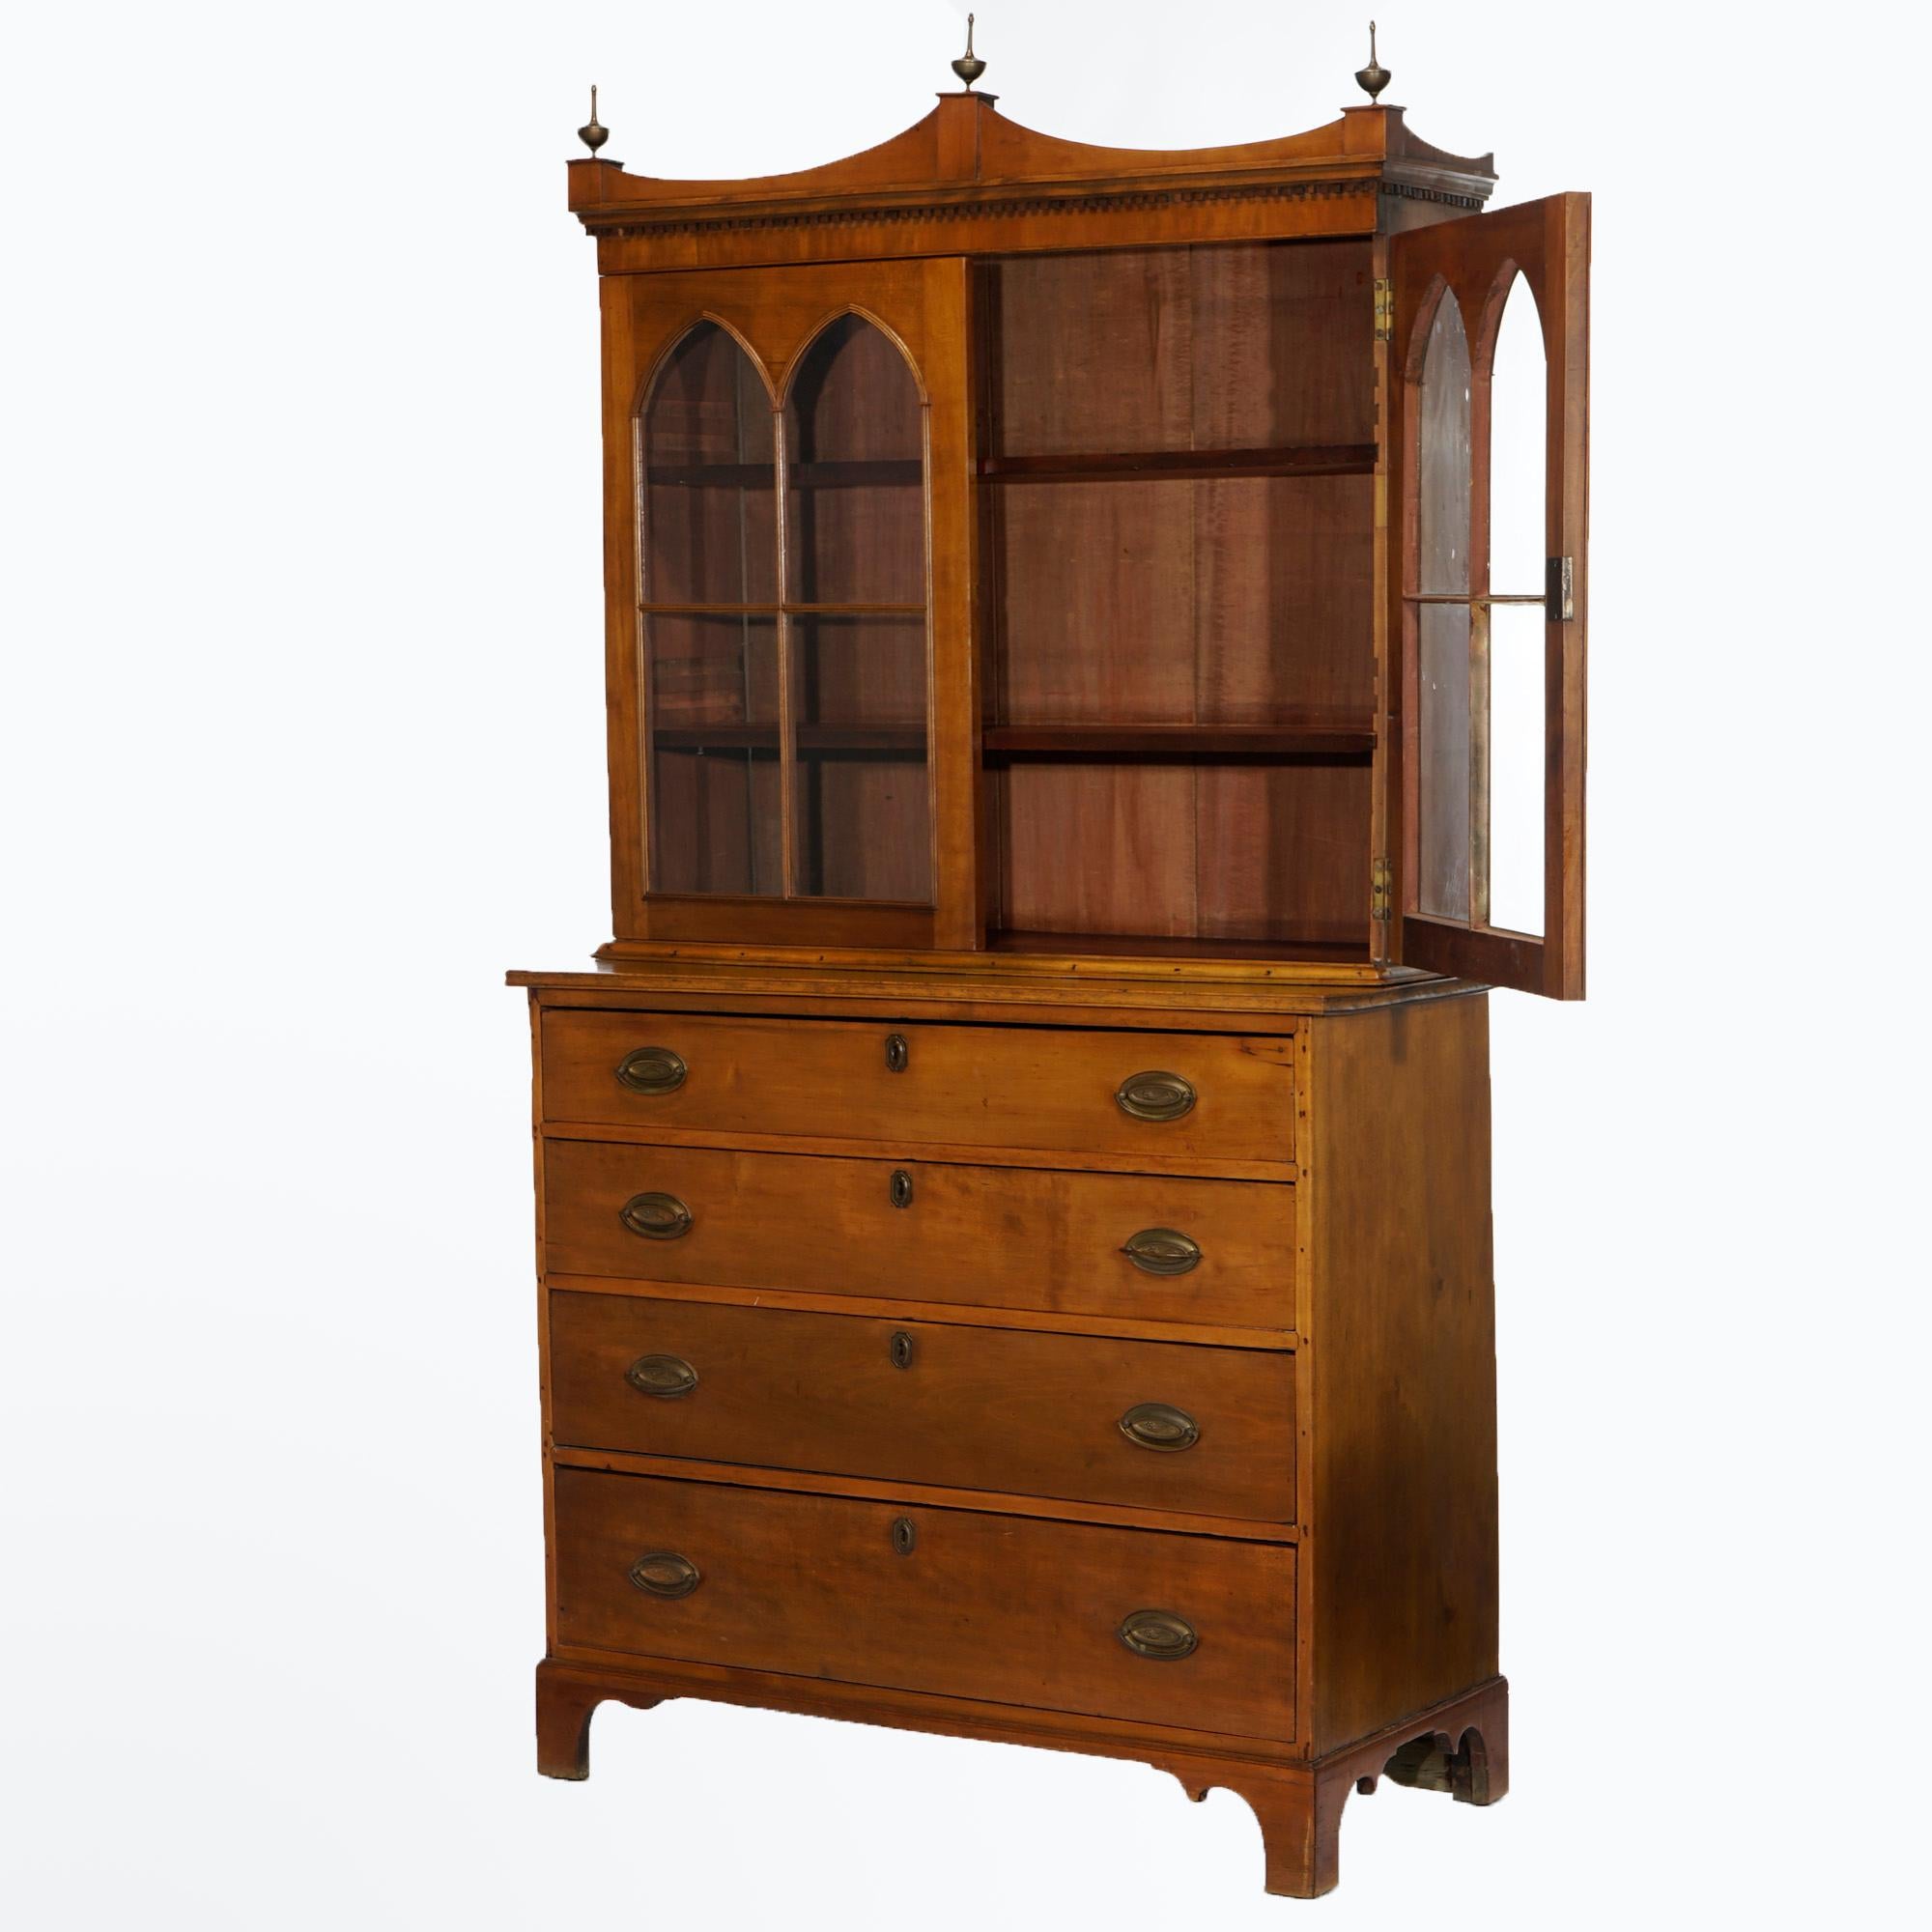 An antique English Hepplewhite breakfront cabinet offers cherry construction with shaped crest having three turned finials over cabinet with double doors with arced glass panels and opening to shelved interior over lower case with four graduated